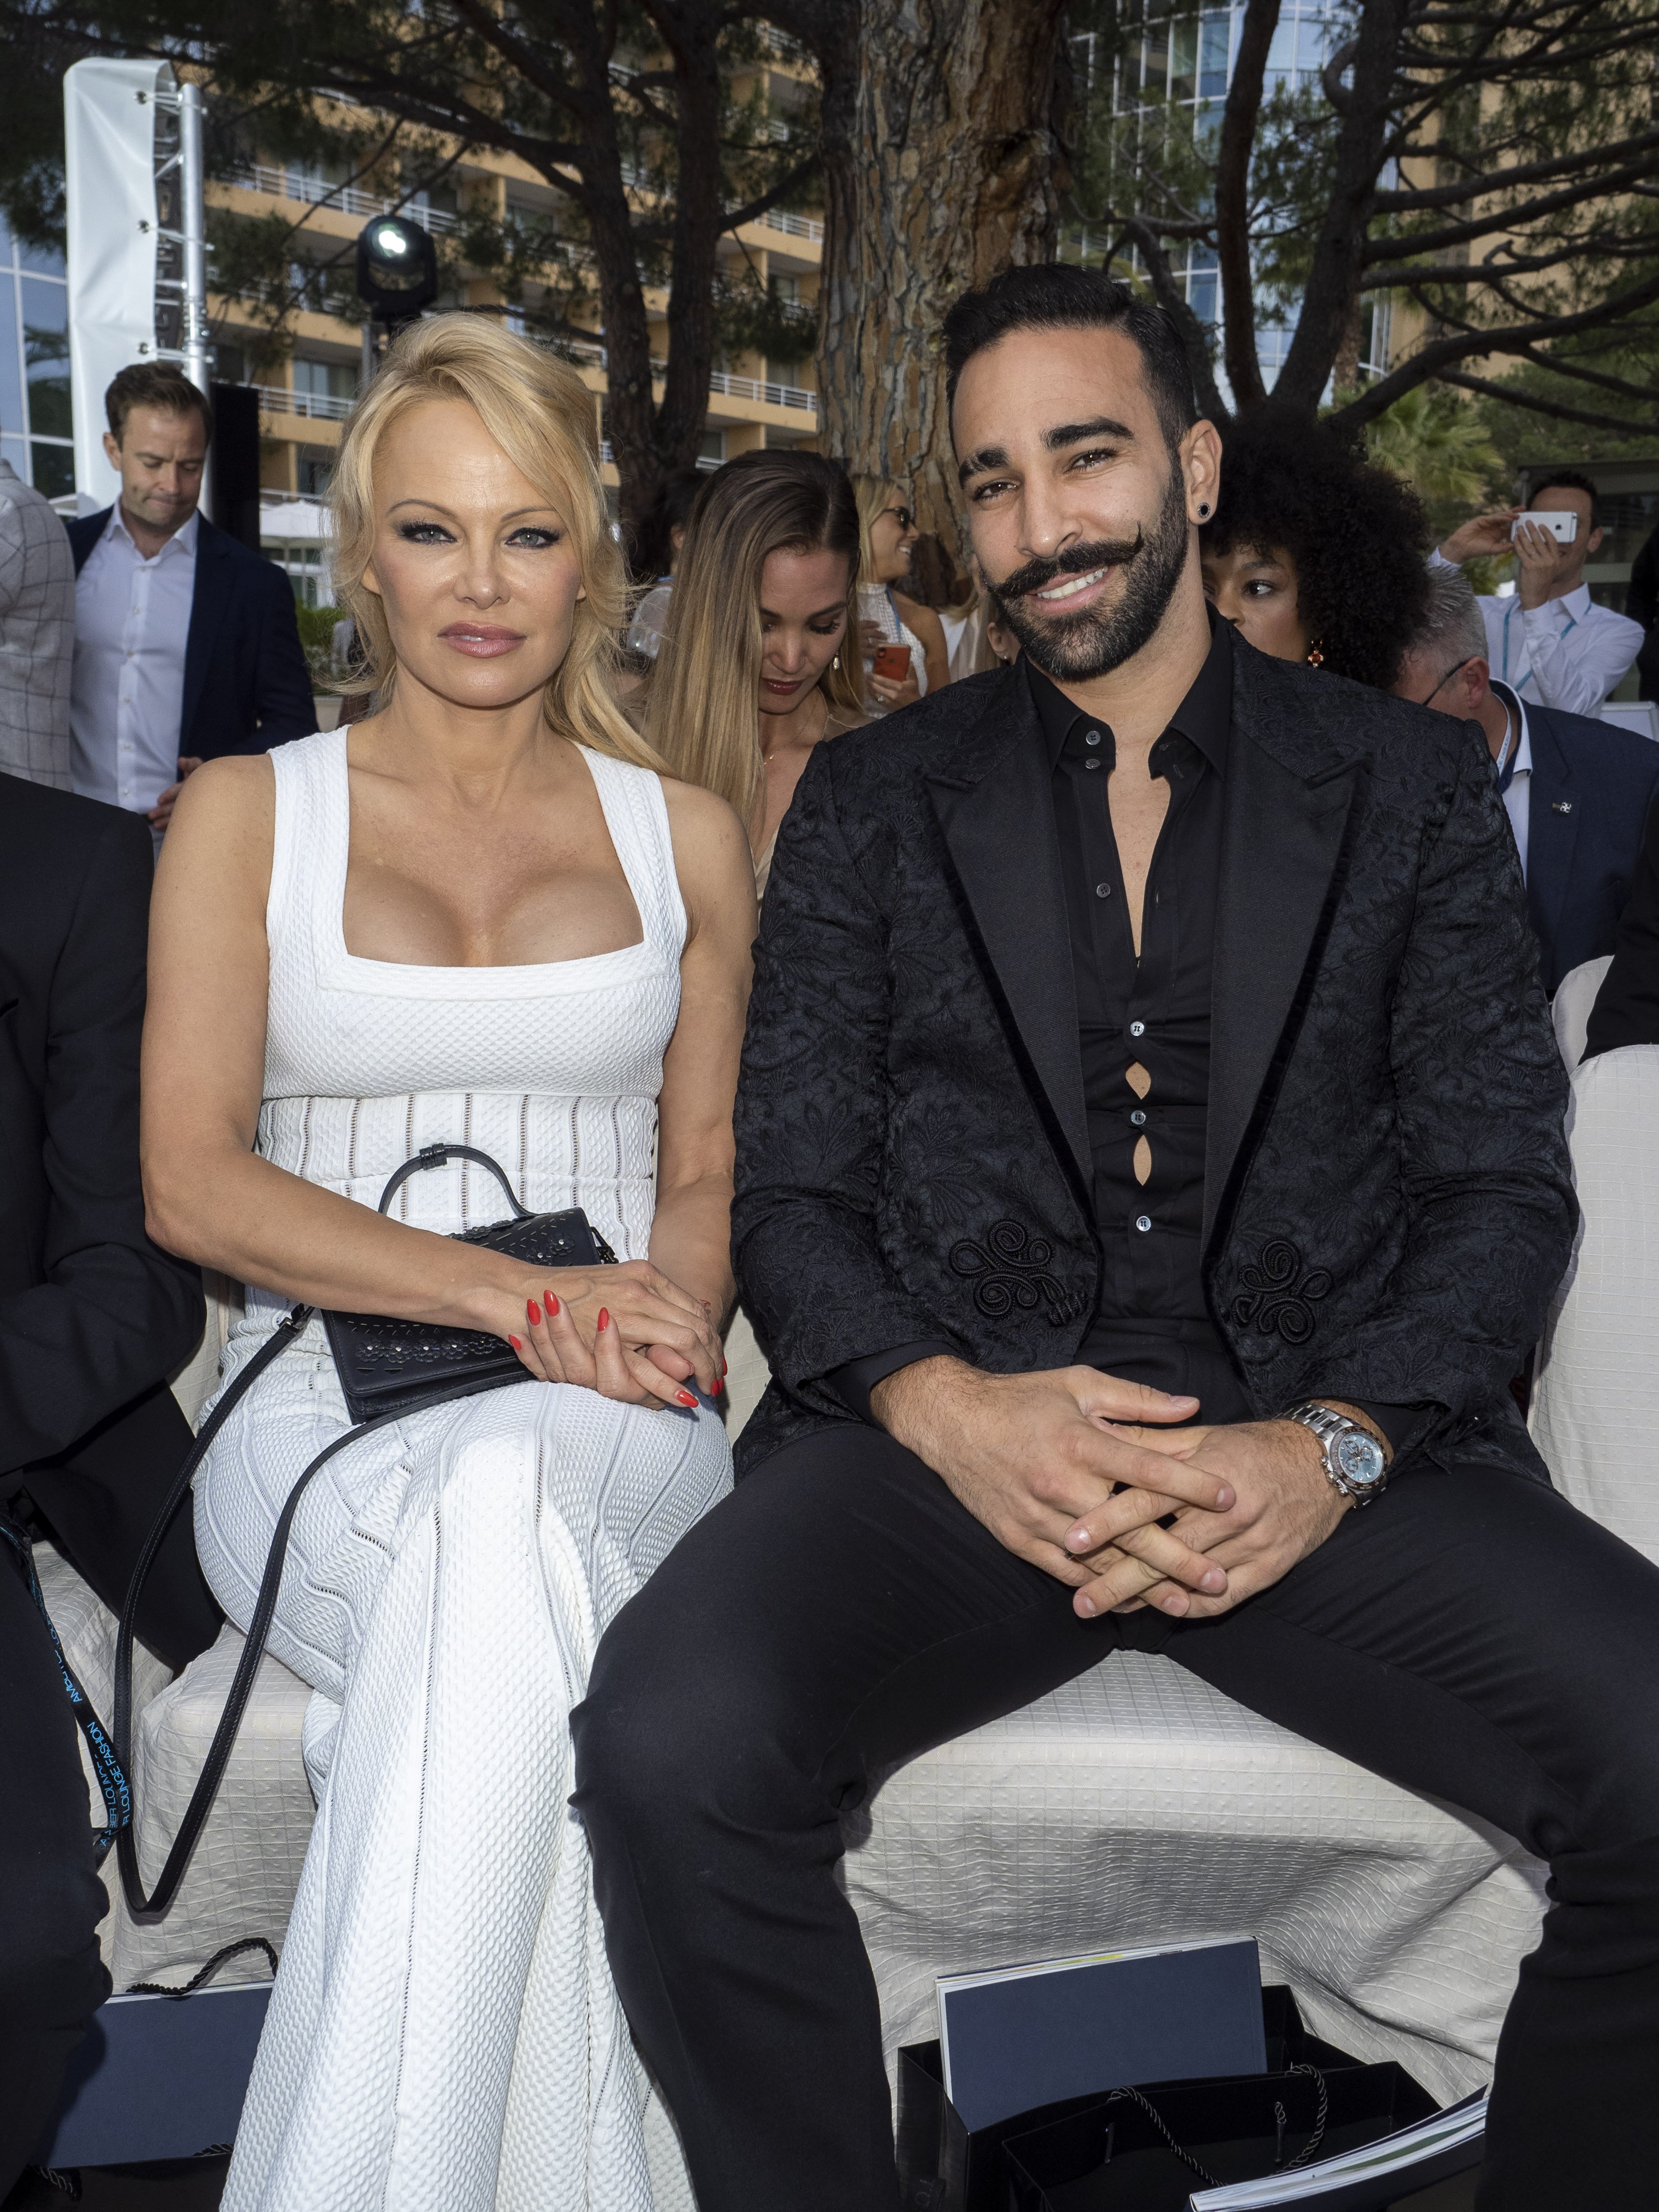 Pamela Anderson and Adil Rami attend Amber Lounge 2019 Fashion Show. | Source: Getty Image